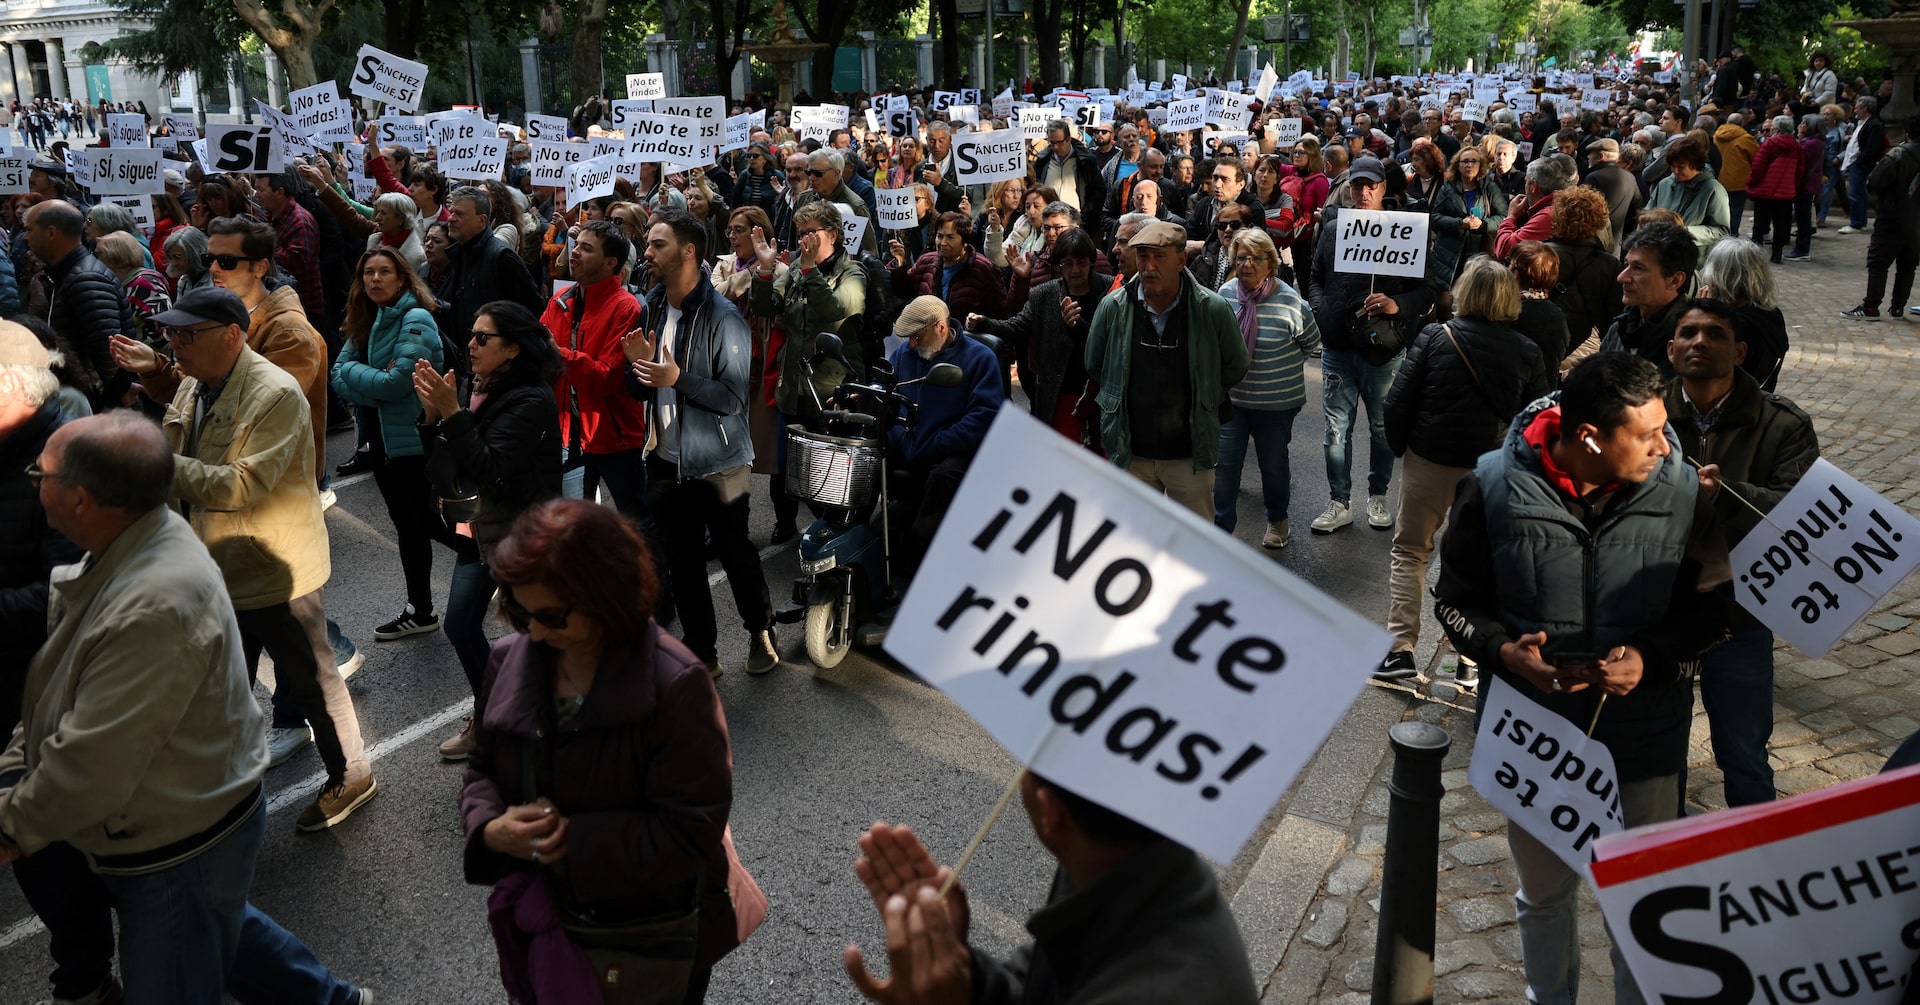 Supporters of Spain’s prime minister rally in Madrid to urge him not to quit